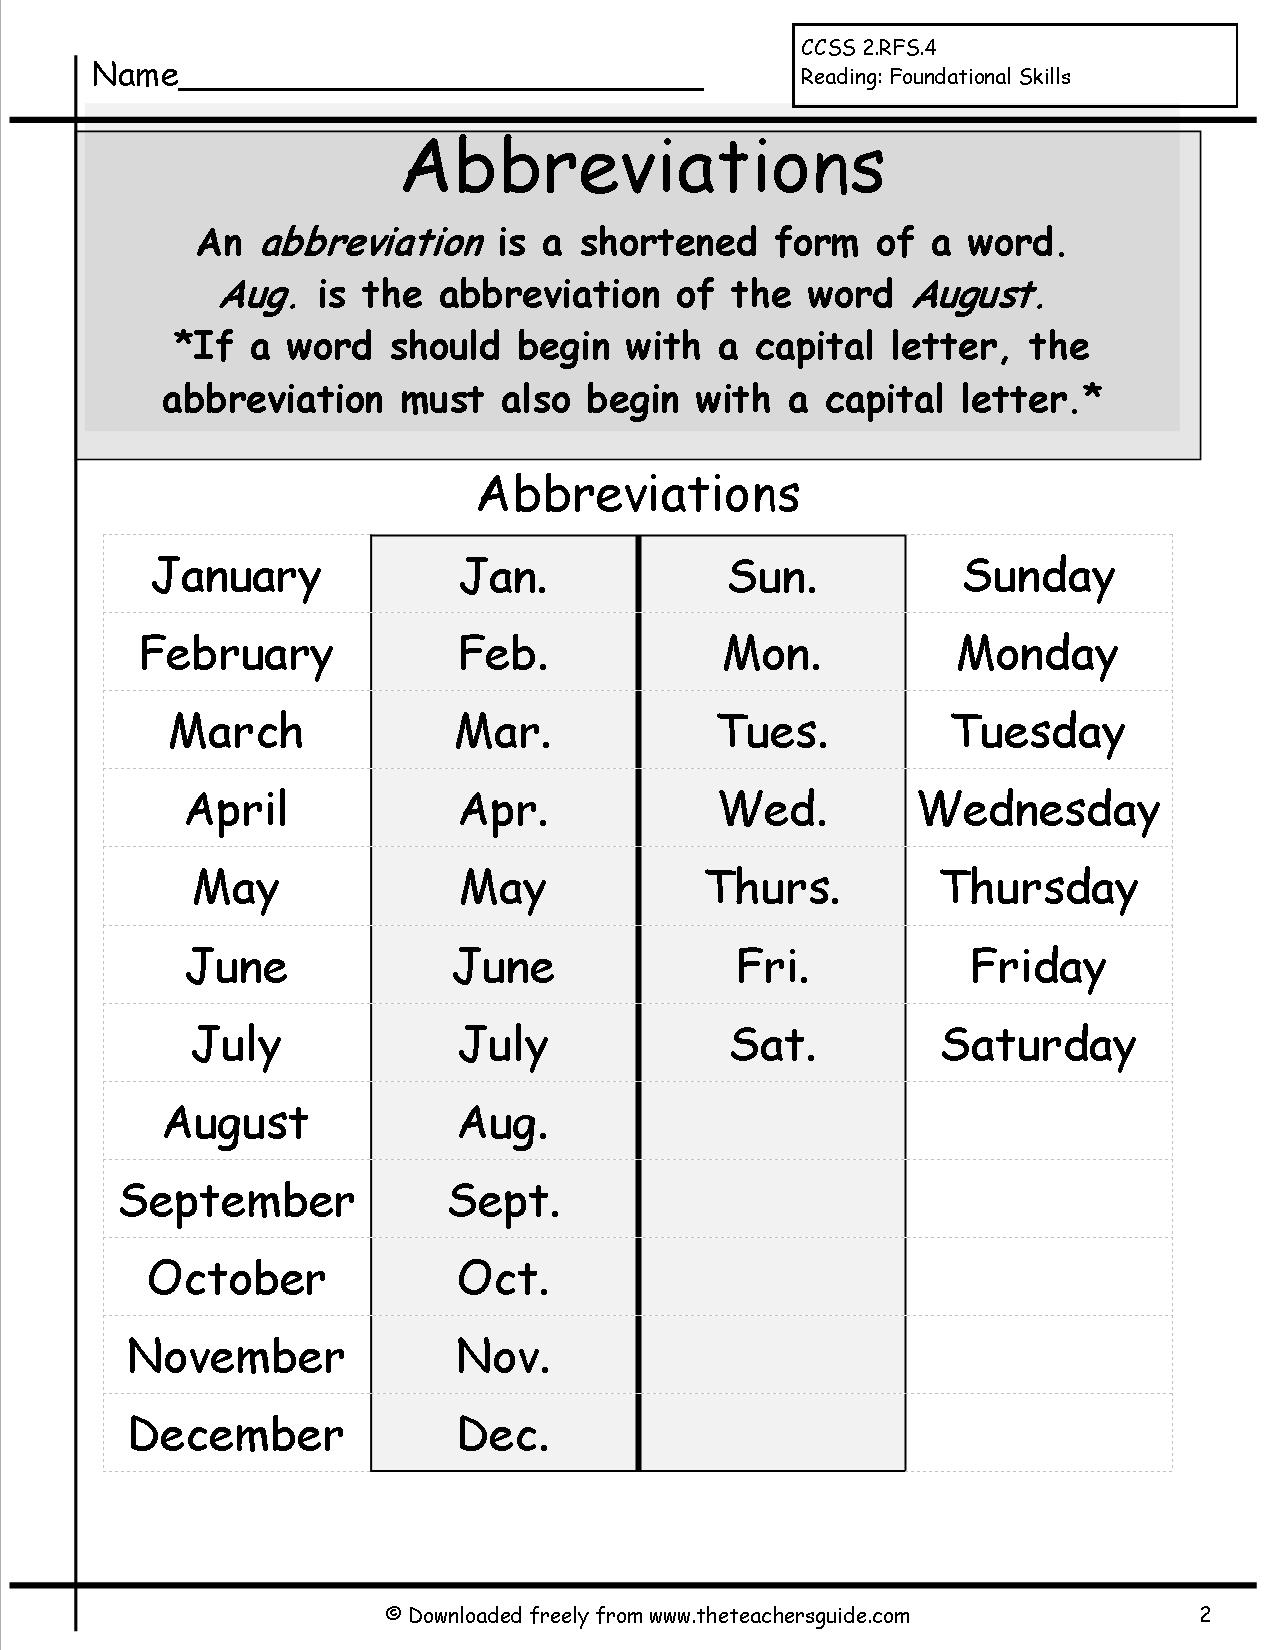 Month Abbreviations Worksheets